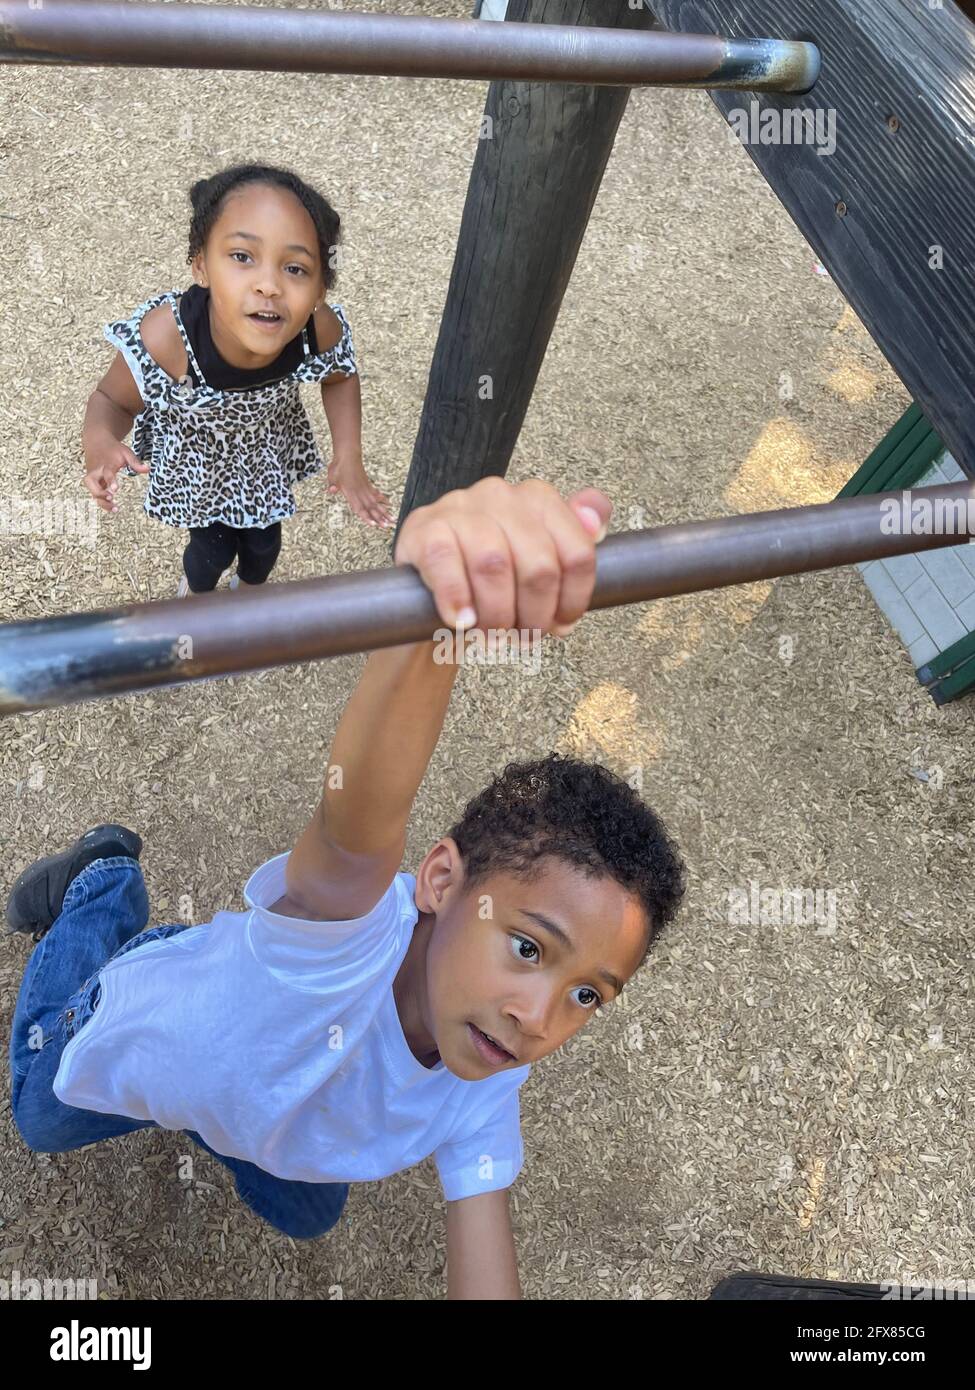 Vertical shot of a black boy and girl playing in a park and swinging from monkey bars Stock Photo